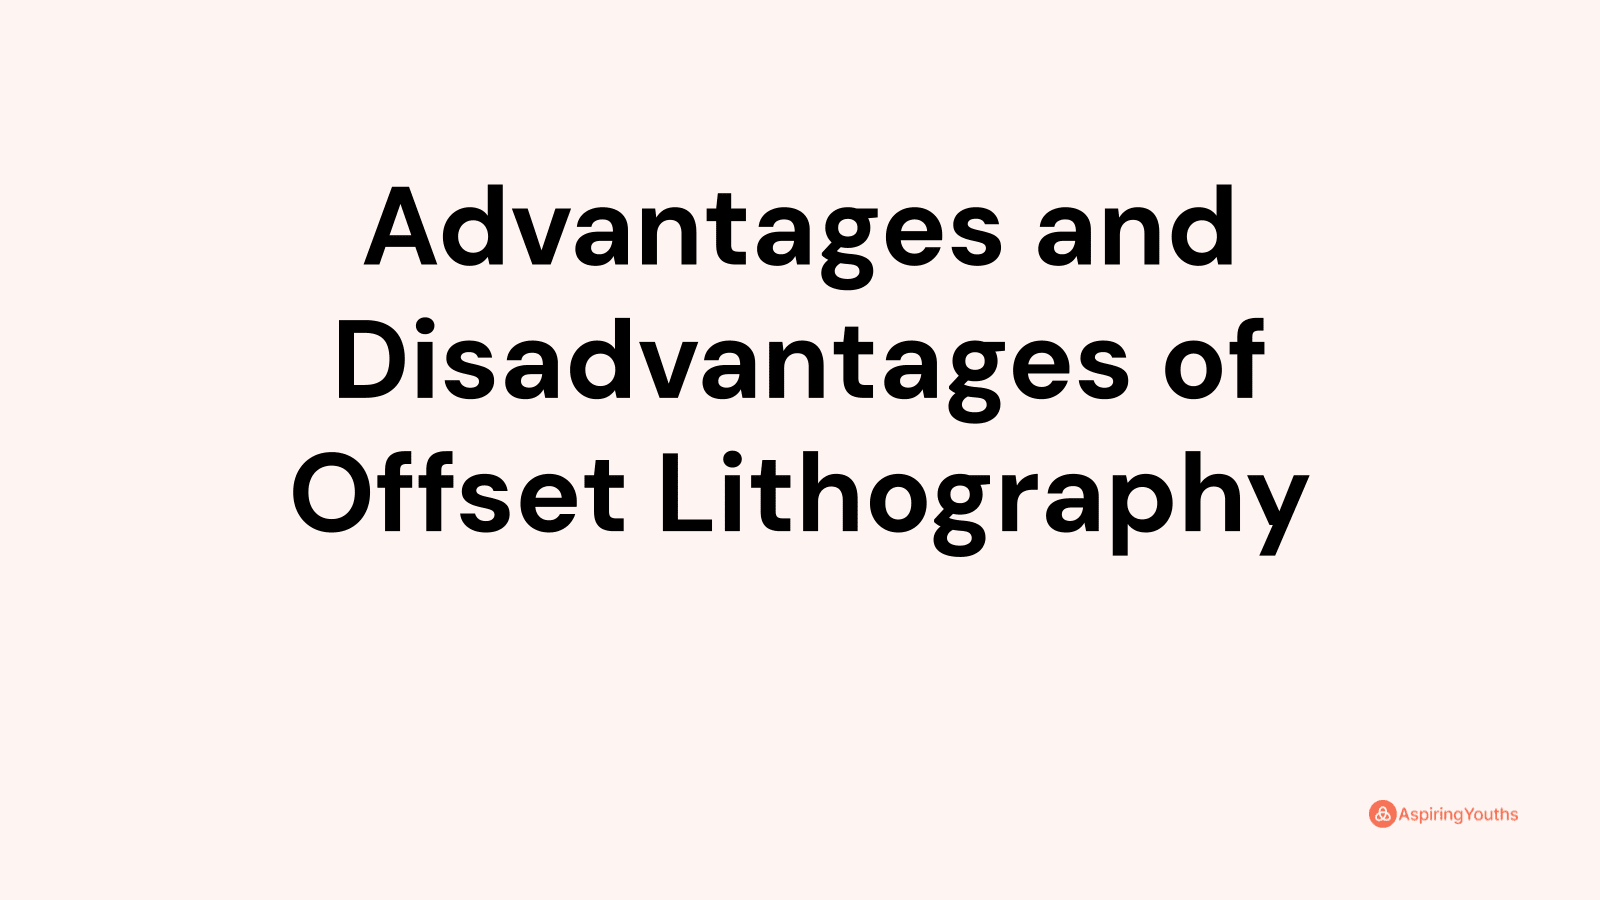 Advantages and disadvantages of Offset Lithography